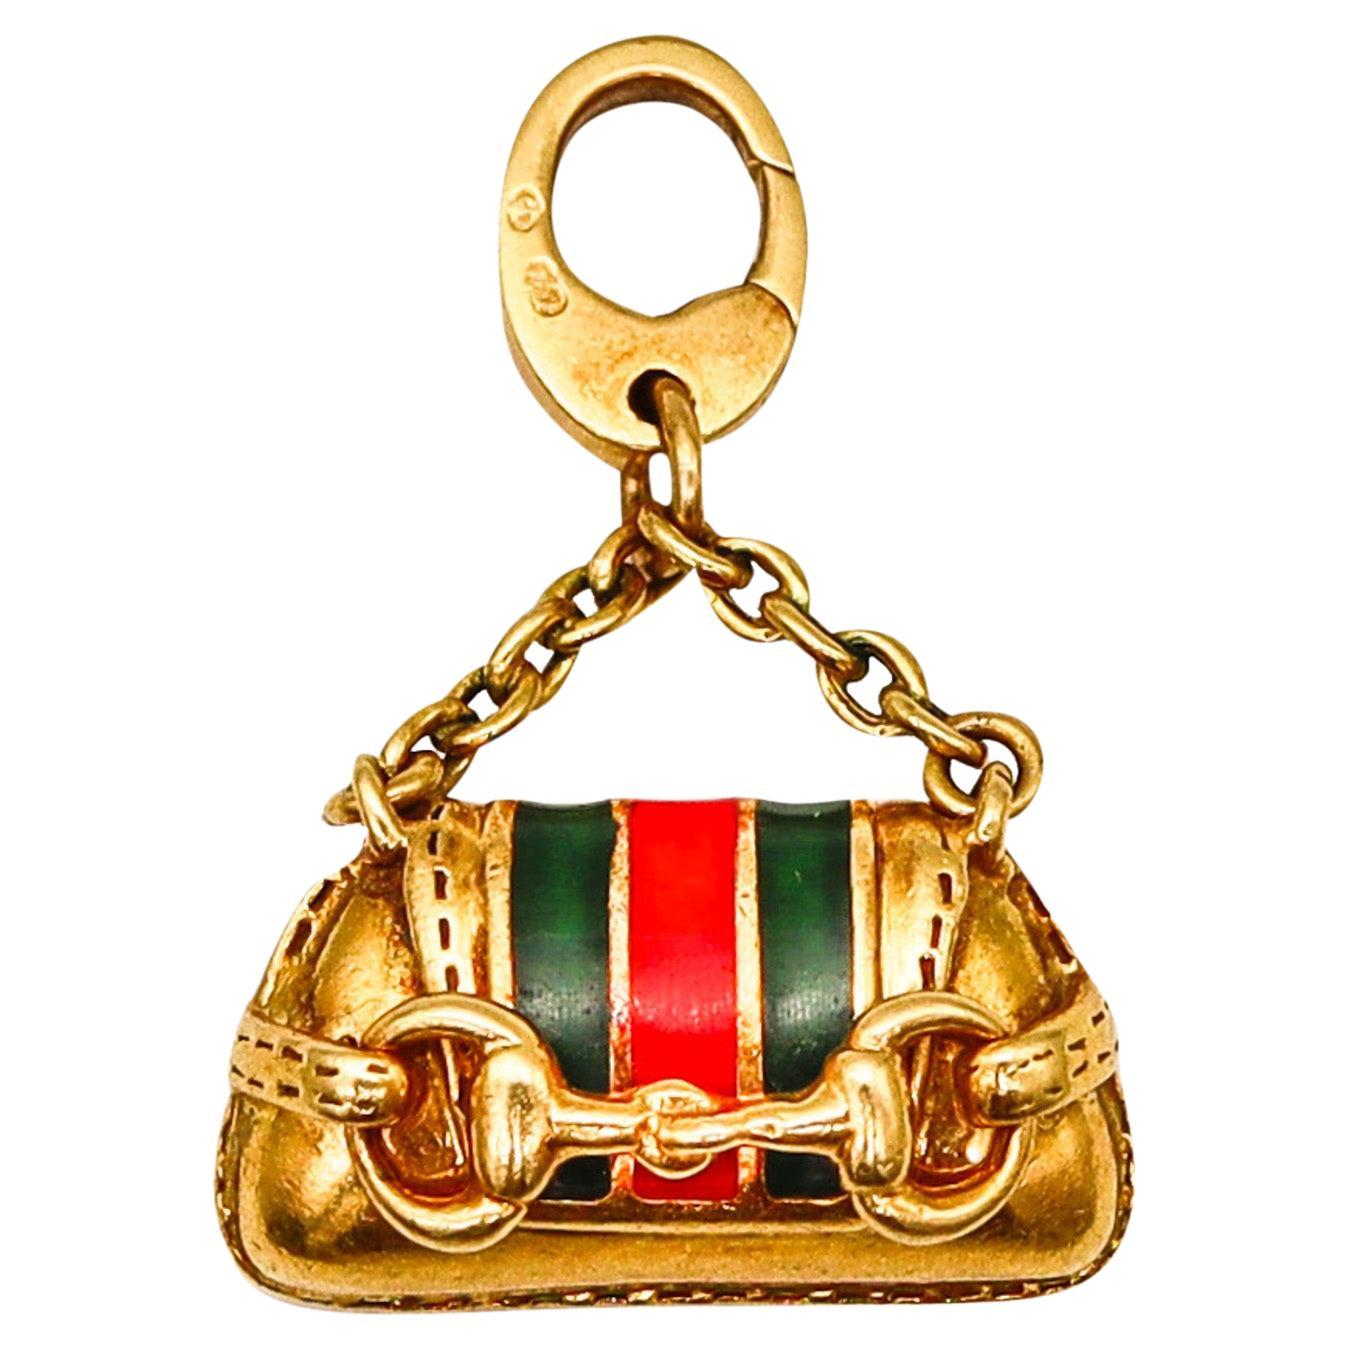 Gucci Milano Horsebit Bag Charm Pendant In 18Kt Gold With Red And Green Enamel